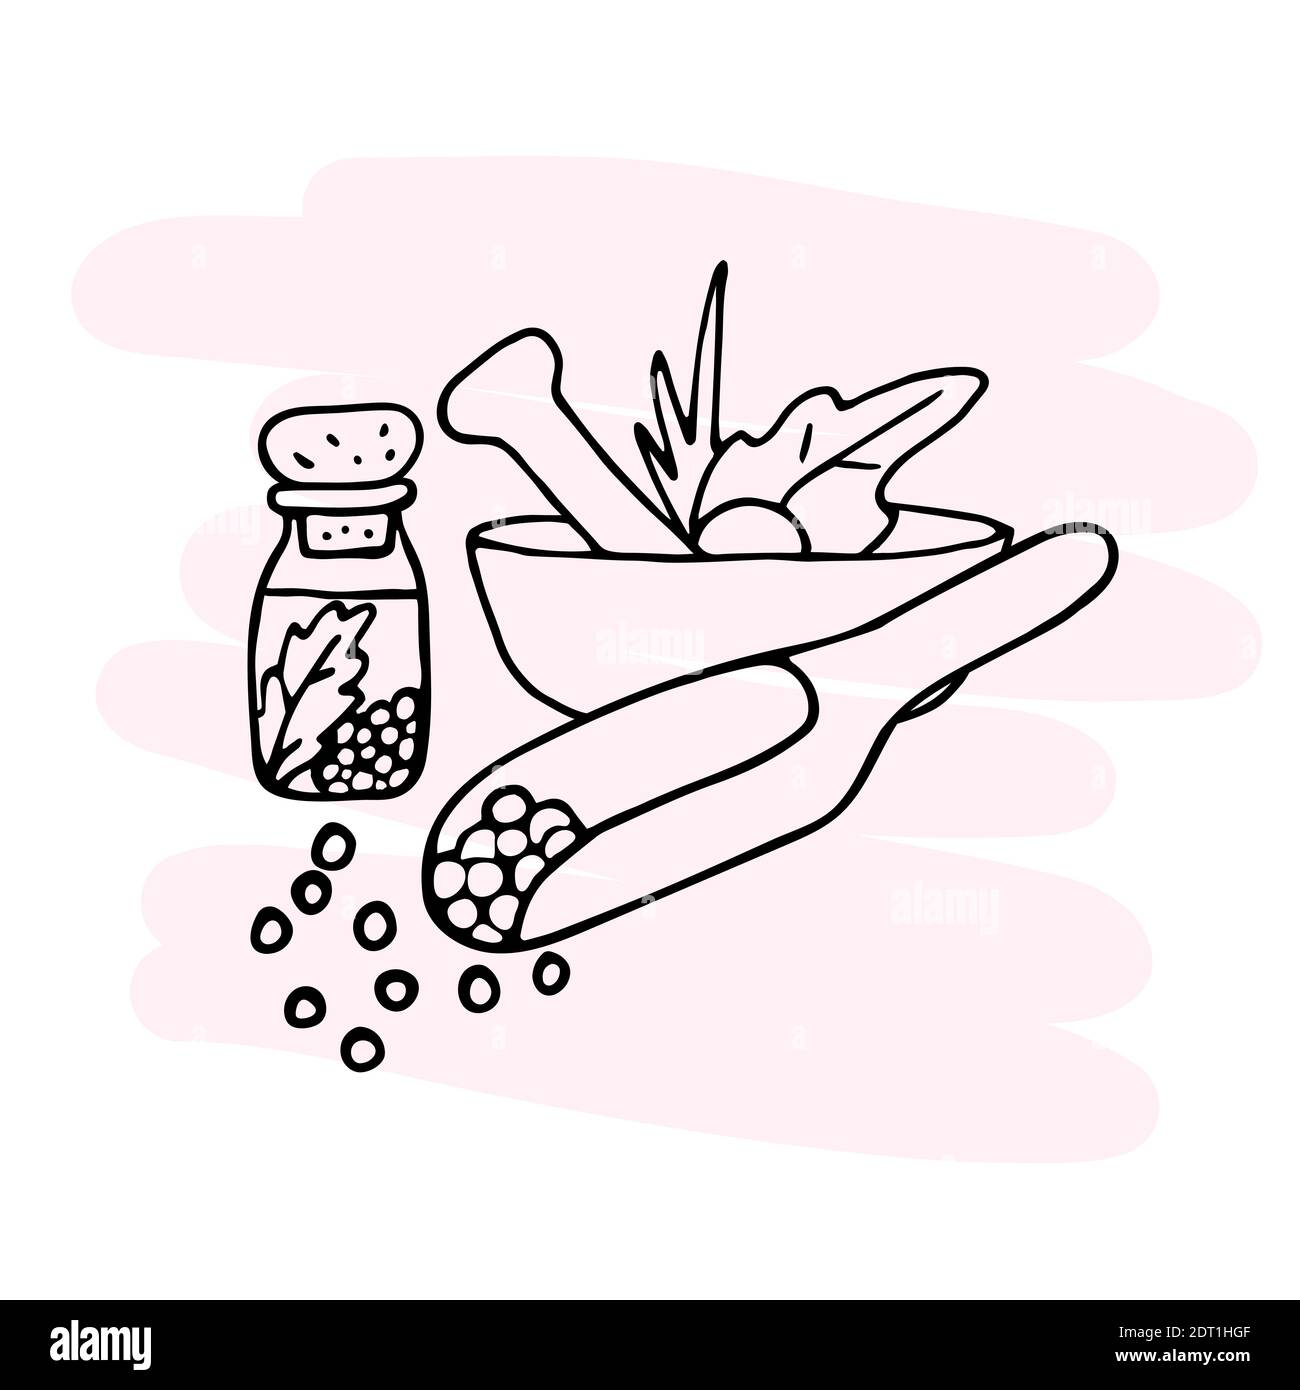 Attributes of alternative medicine. Mortar with pestle for grinding ingredients. A bottle of medicine and pills. Doodle Stock Vector